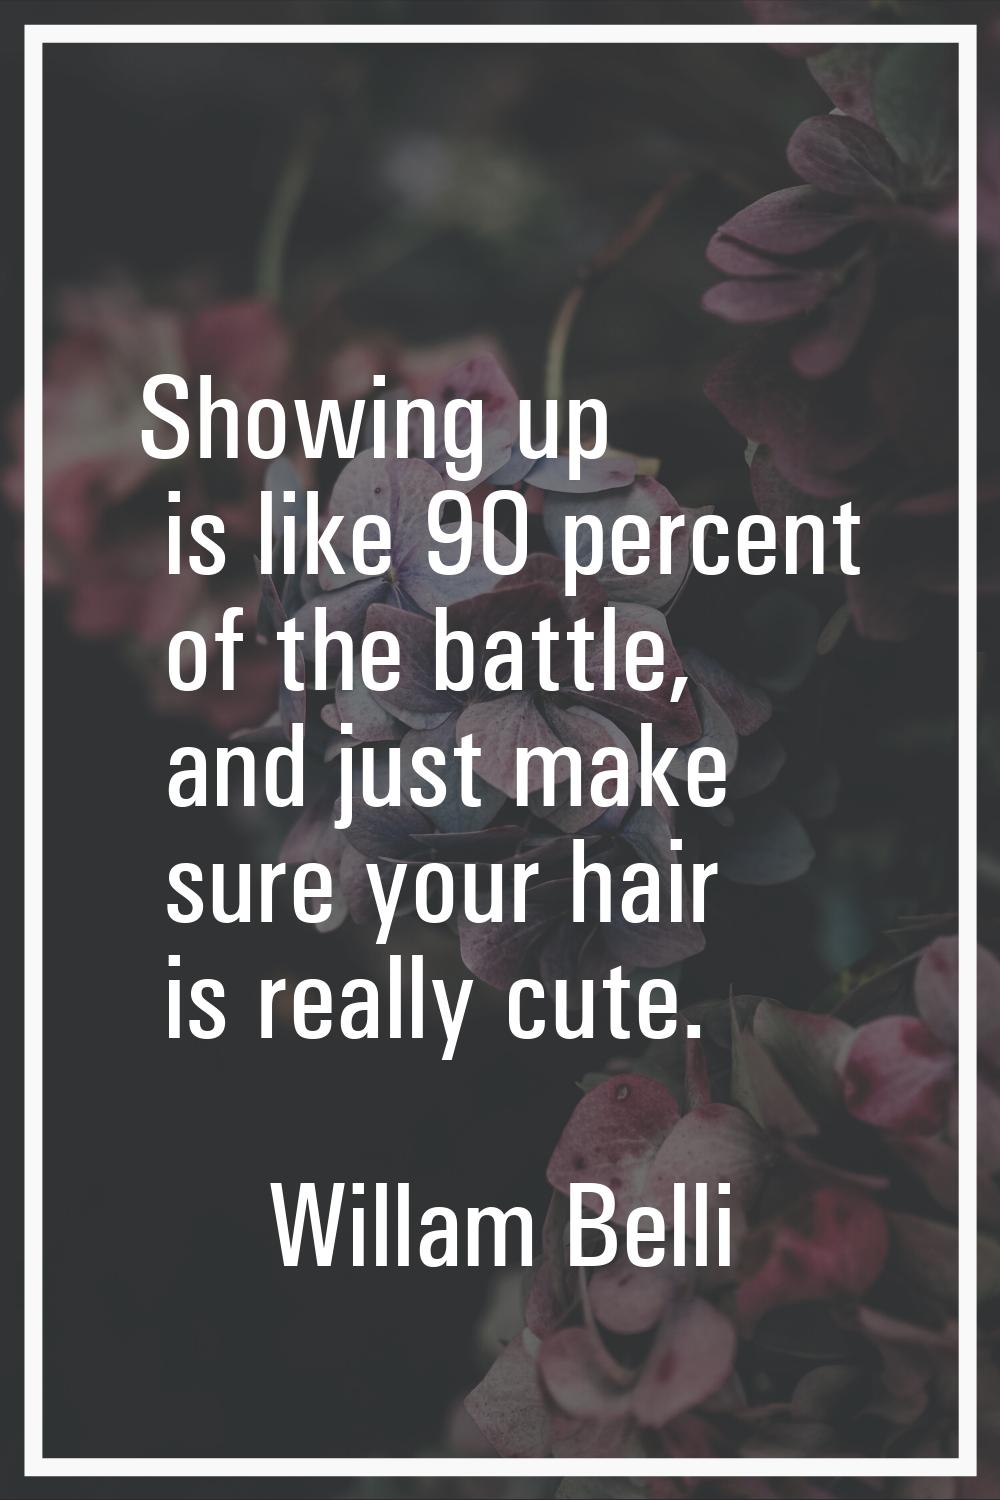 Showing up is like 90 percent of the battle, and just make sure your hair is really cute.